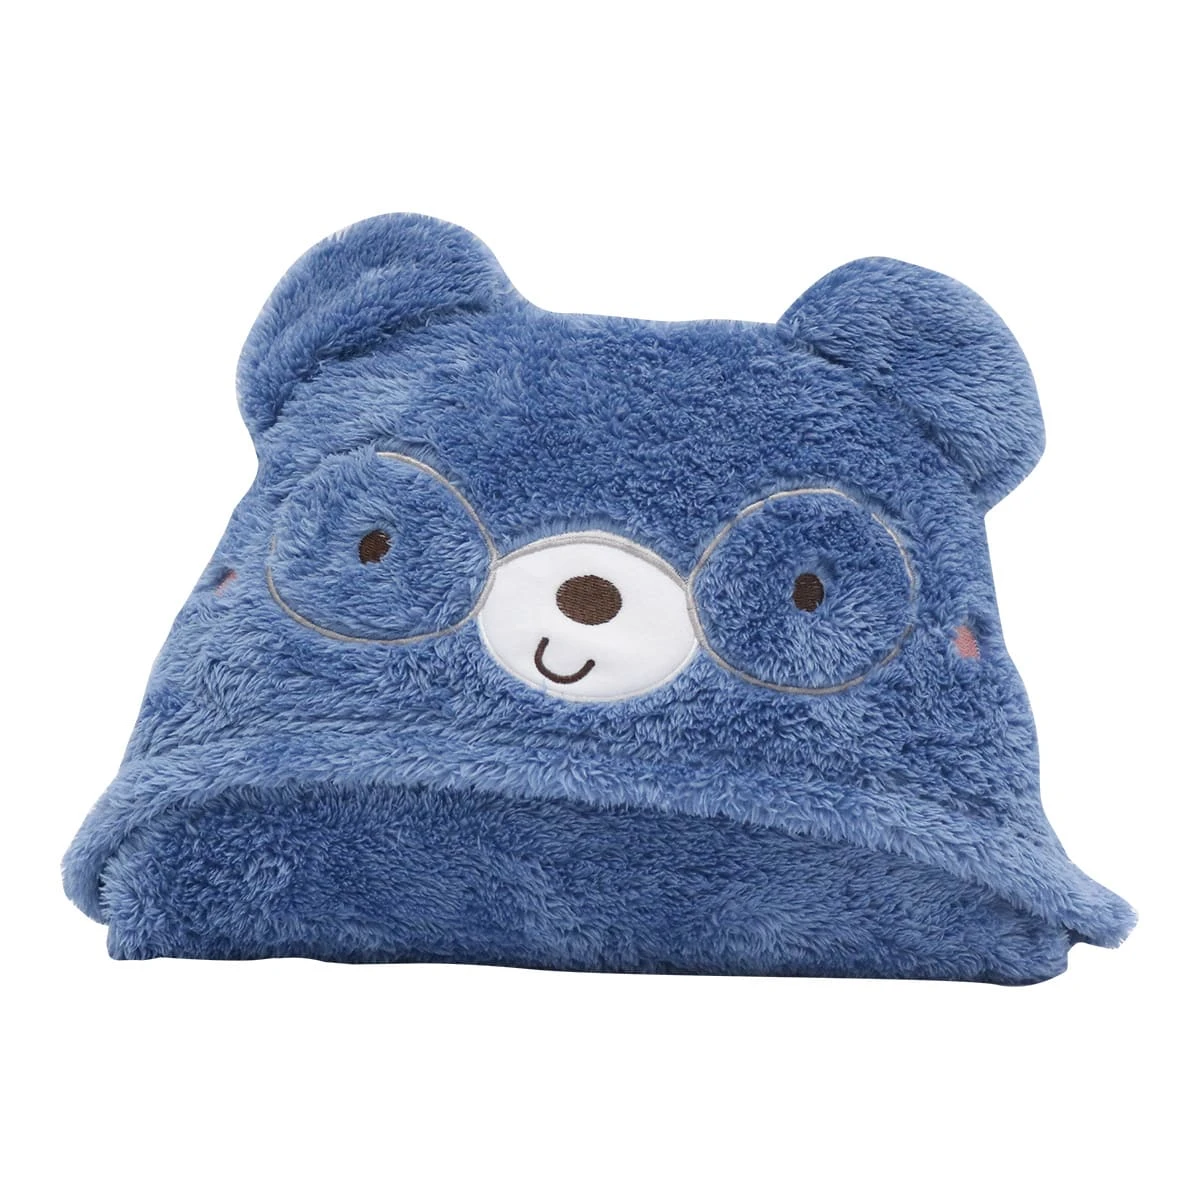 Recycled Polyester Hooded Plush Blanket with Bear Design (Dark Blue)